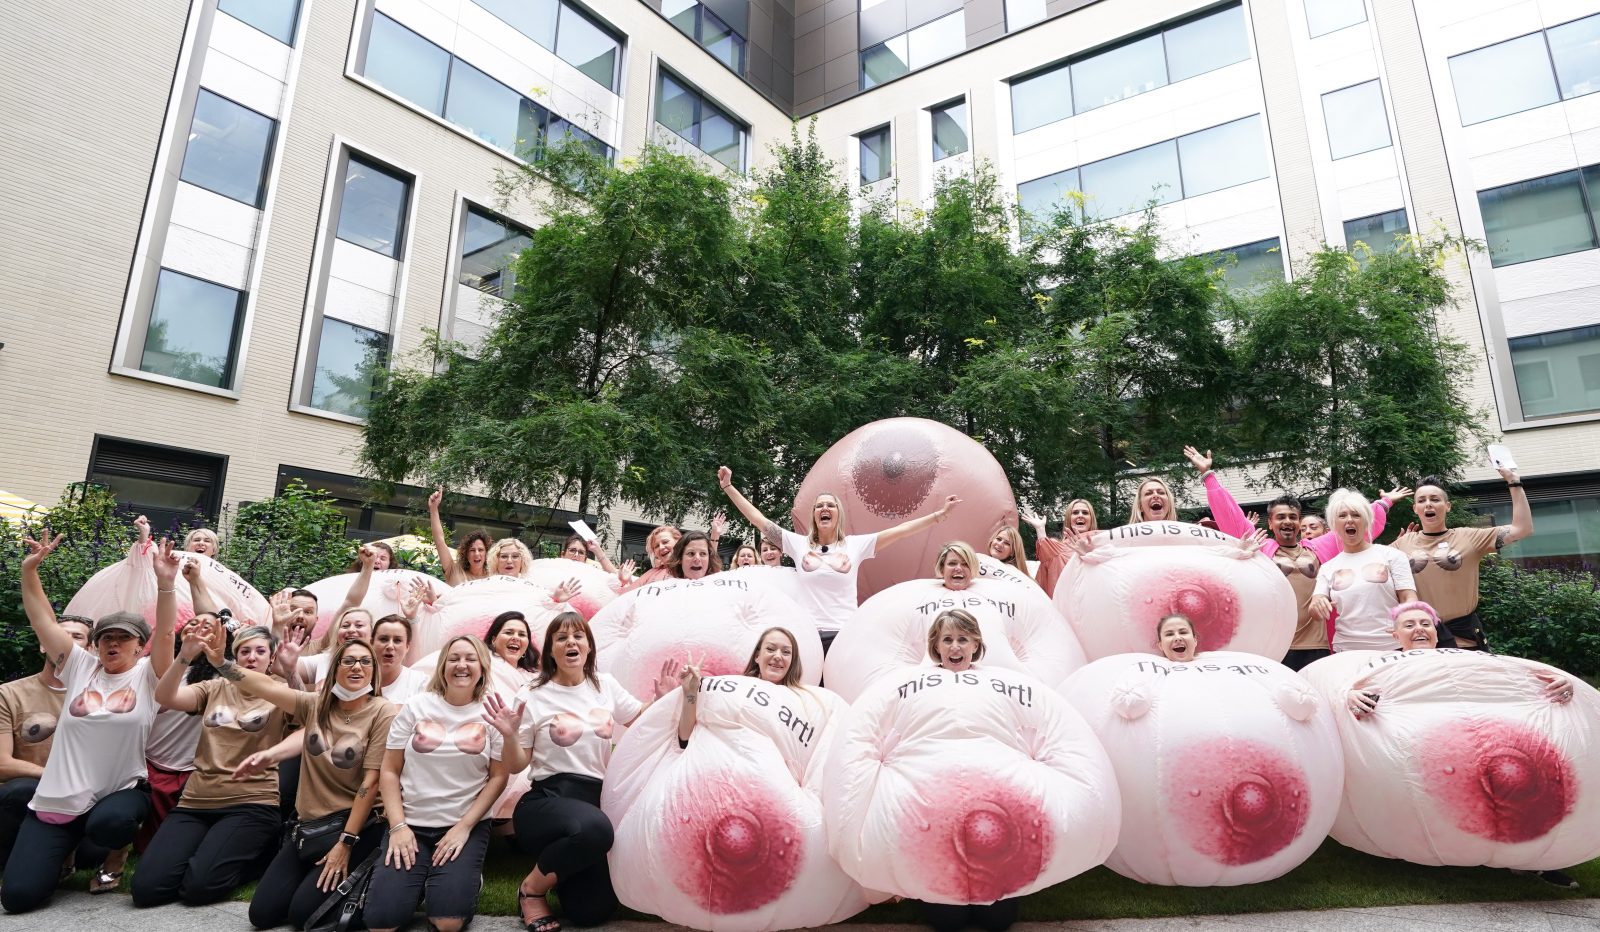 Protesters with inflatable breasts gather outside Facebook's London office  over nipple images - CityAM